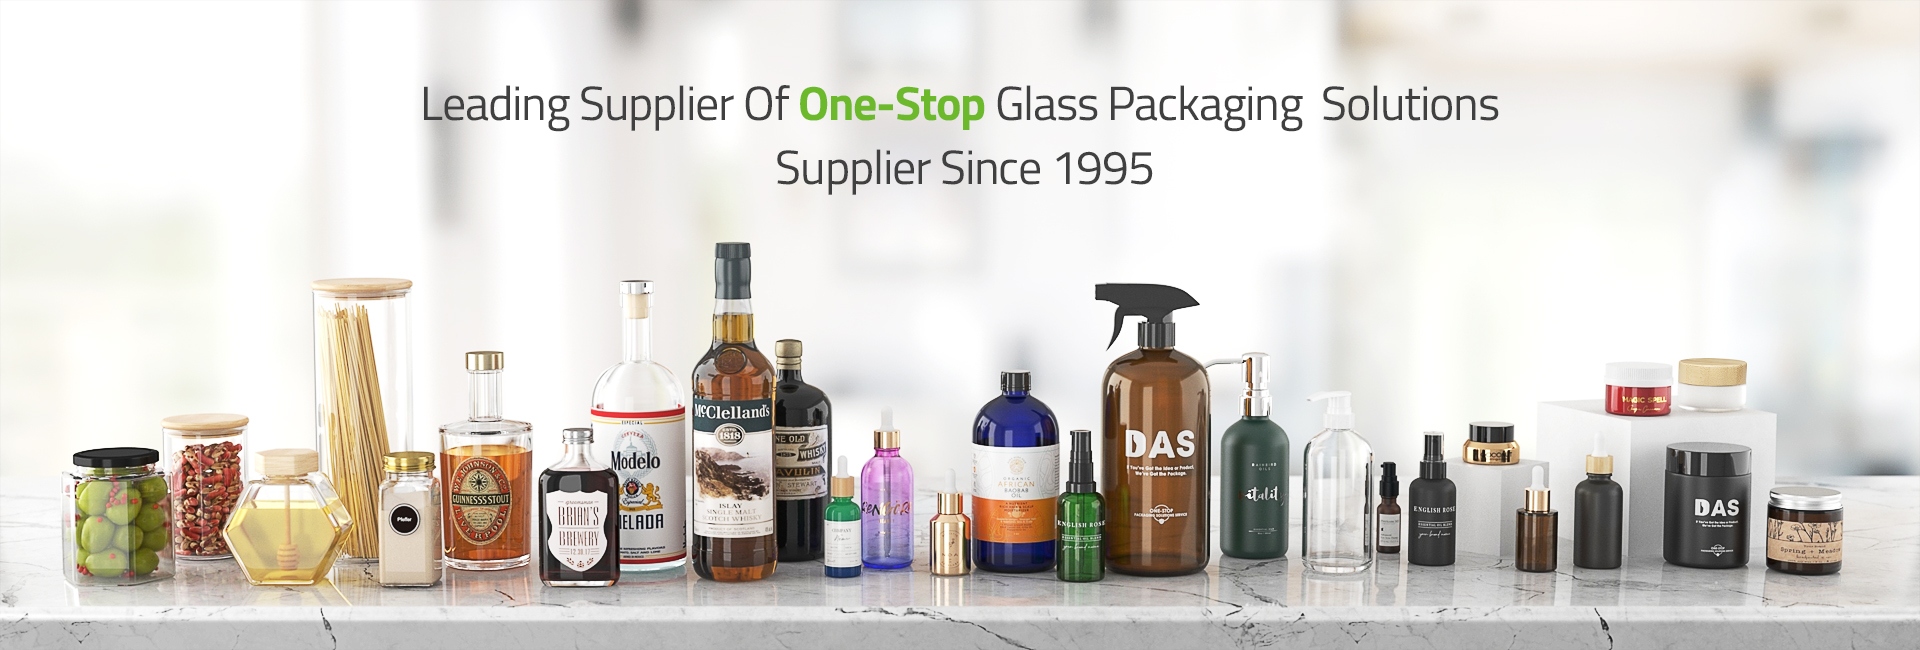 custom glass containers manufacturer